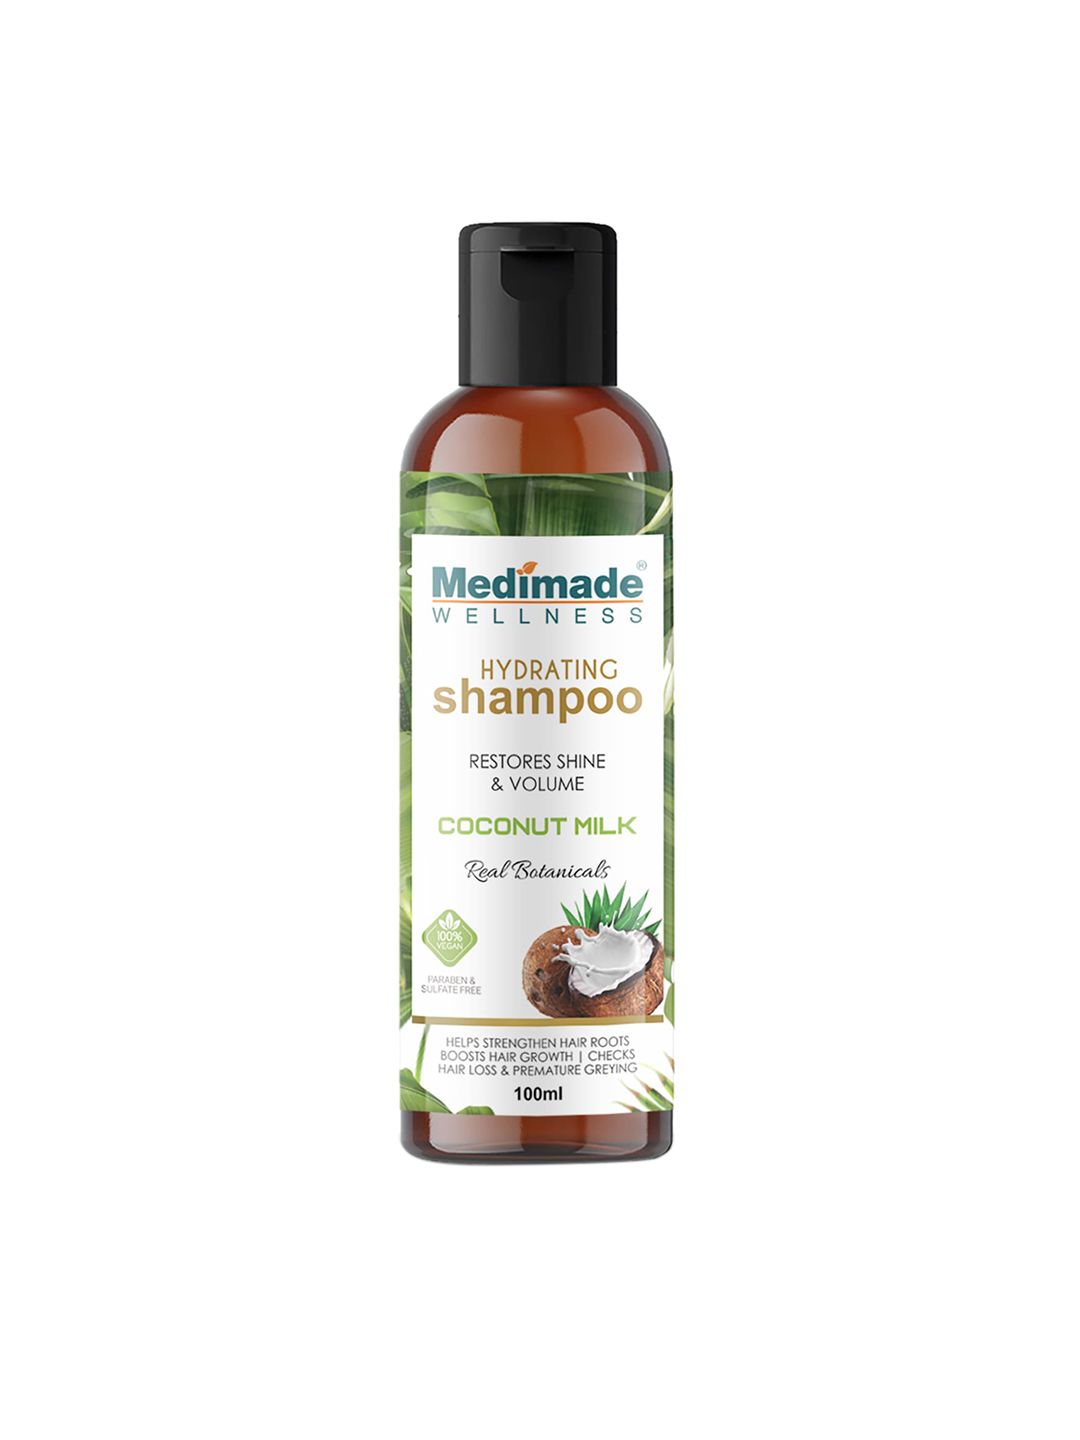 Medimade Hydrating Shampoo with Coconut Milk 100ml Price in India